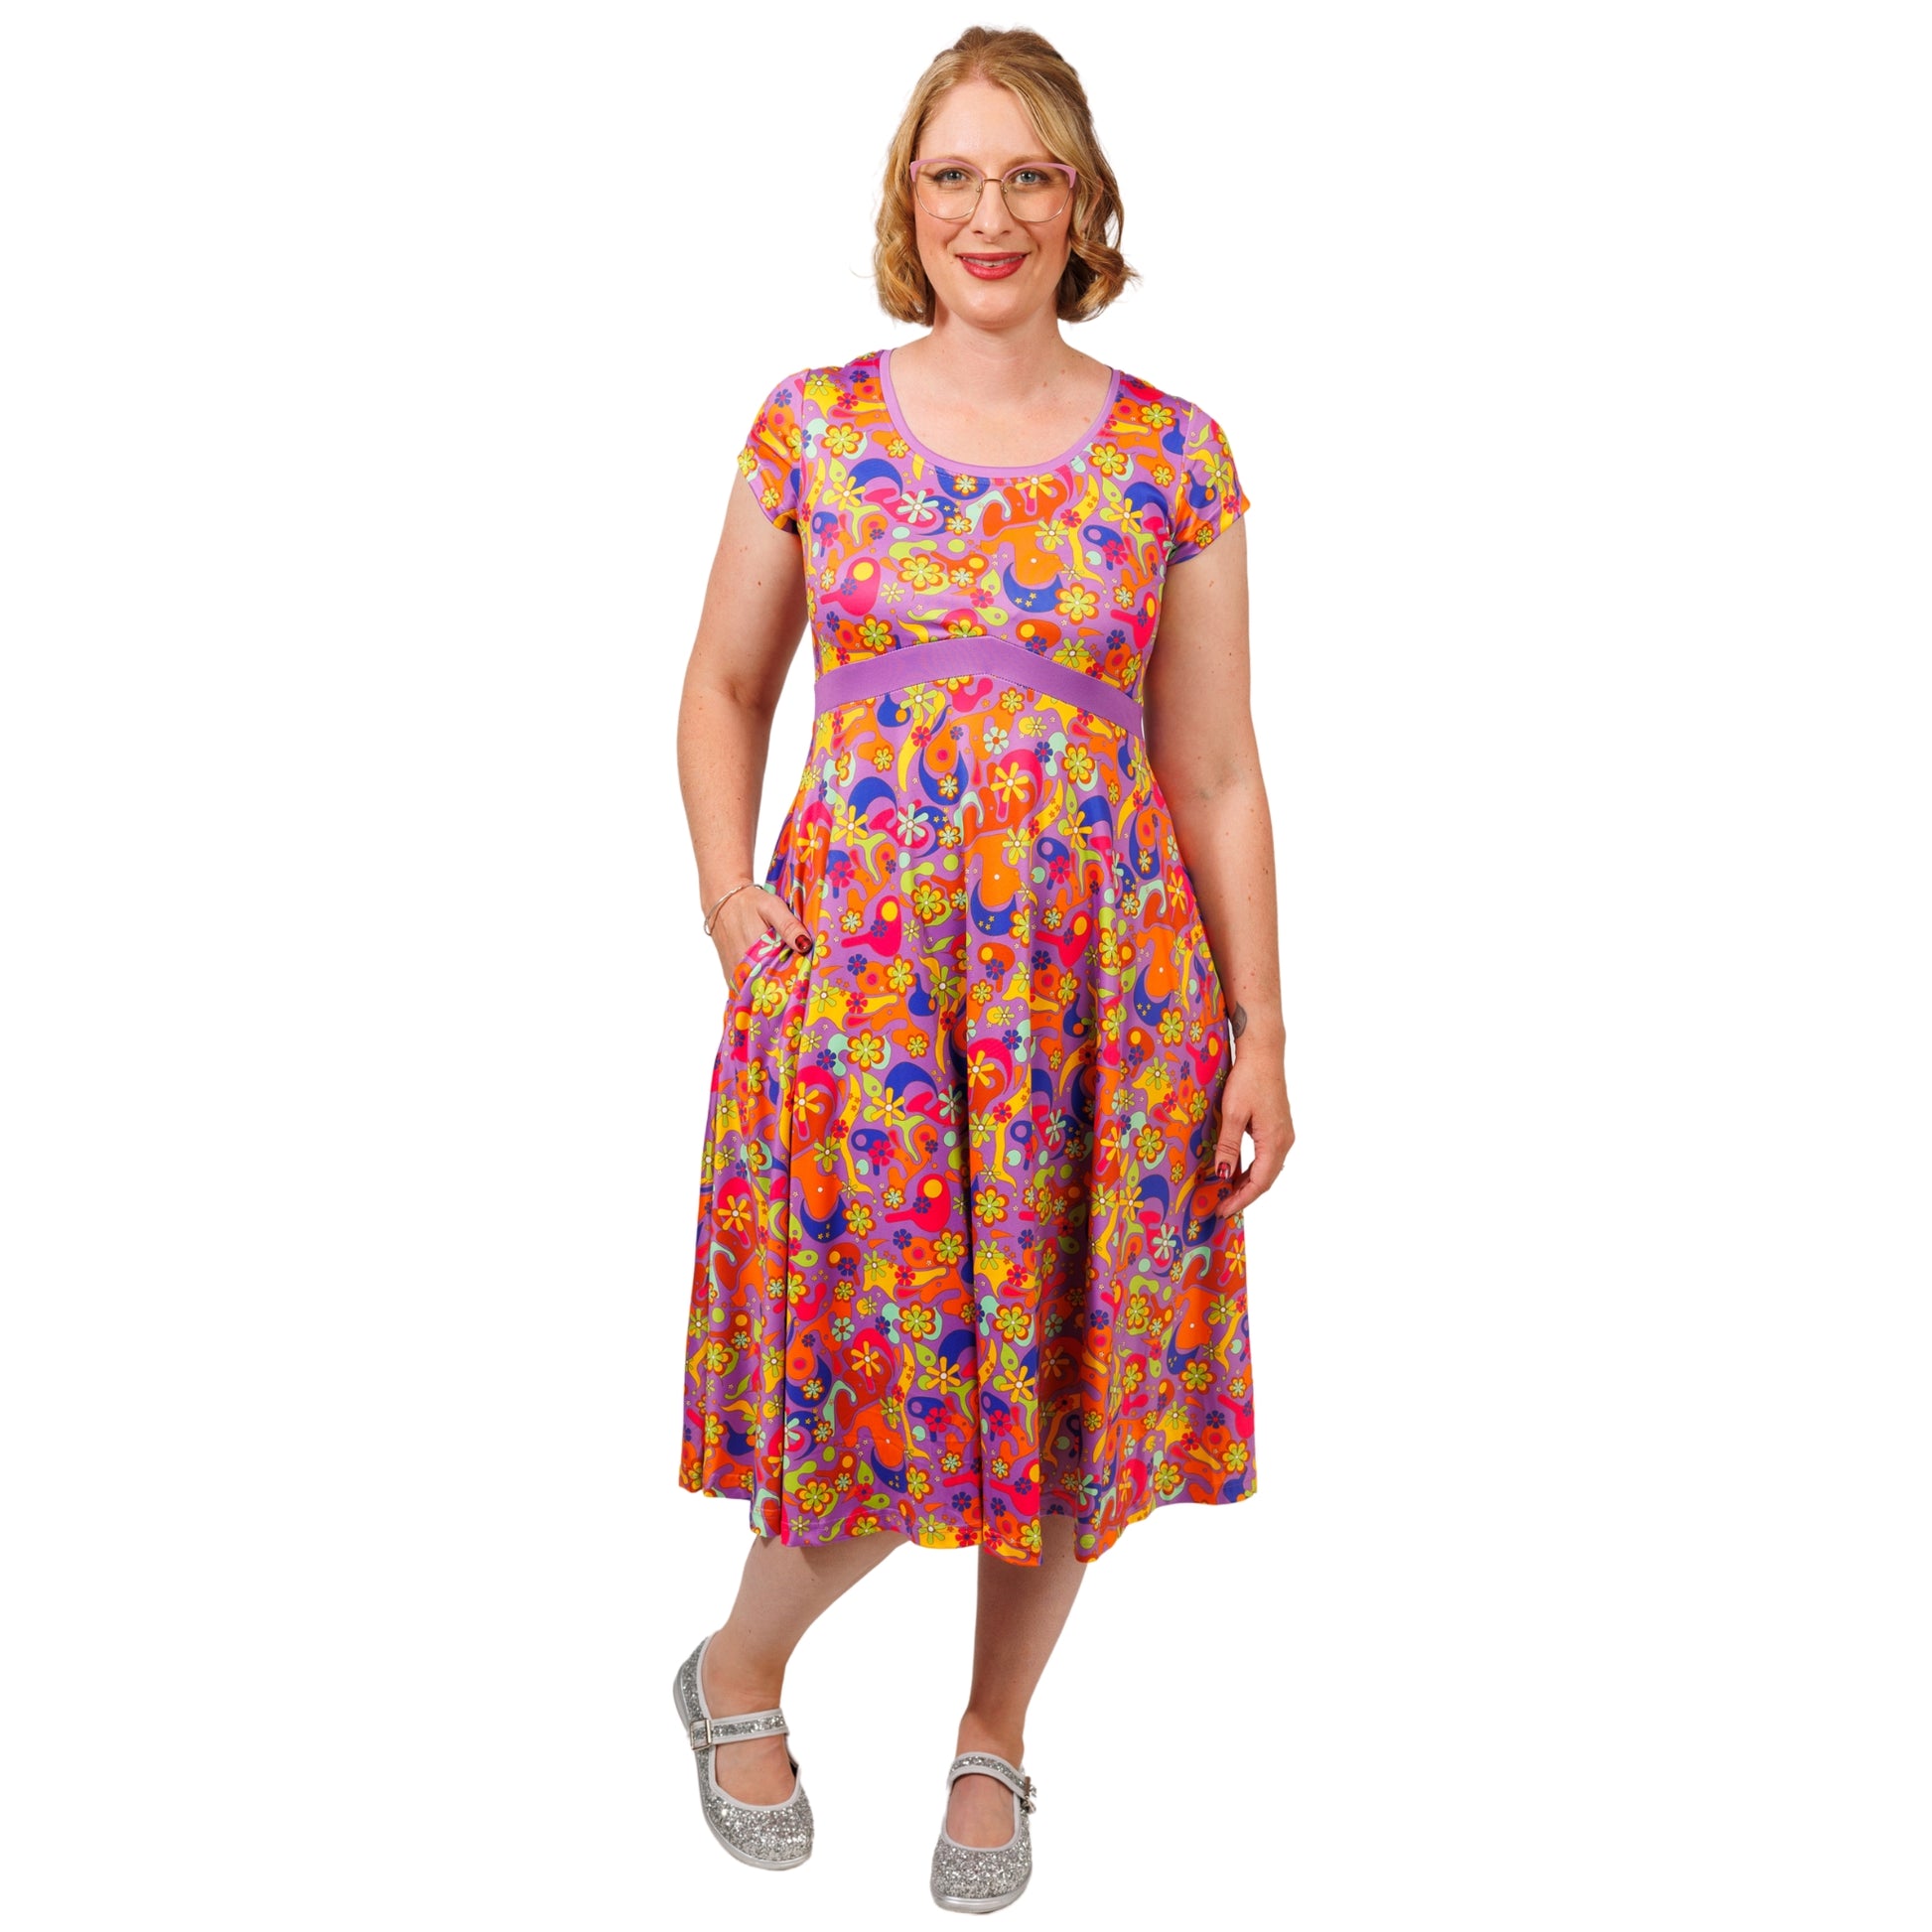 Flower Power Tea Dress by RainbowsAndFairies.com.au (Floral Print - Woodstock - Psychedelic - Dress With Pockets - Retro - Circle Skirt - Rockabilly) - SKU: CL_TEADR_FLOPO_ORG - Pic-04